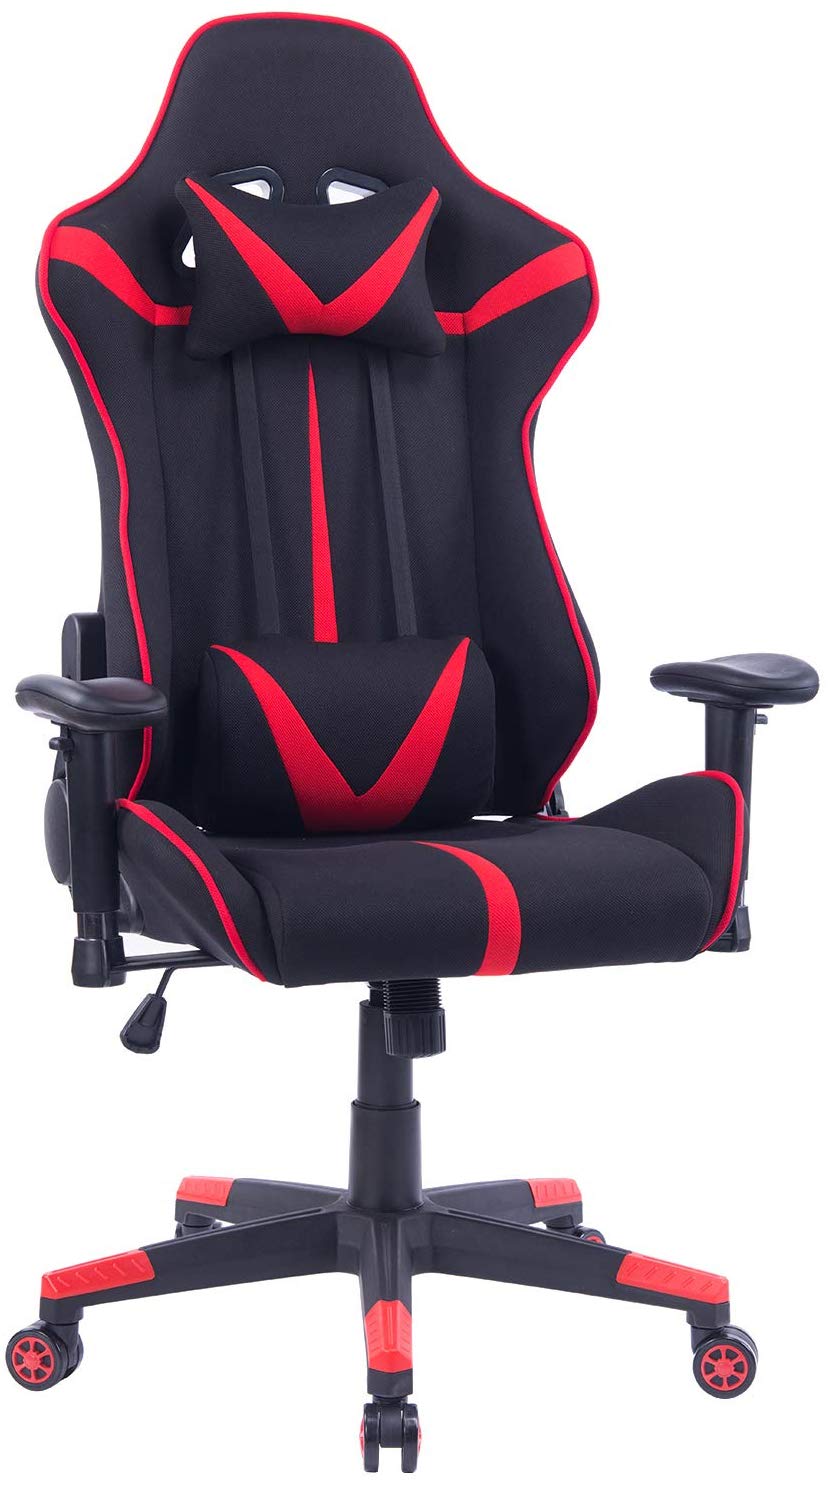 Gaming chair with headrest & lumbar cushion with fabric cover